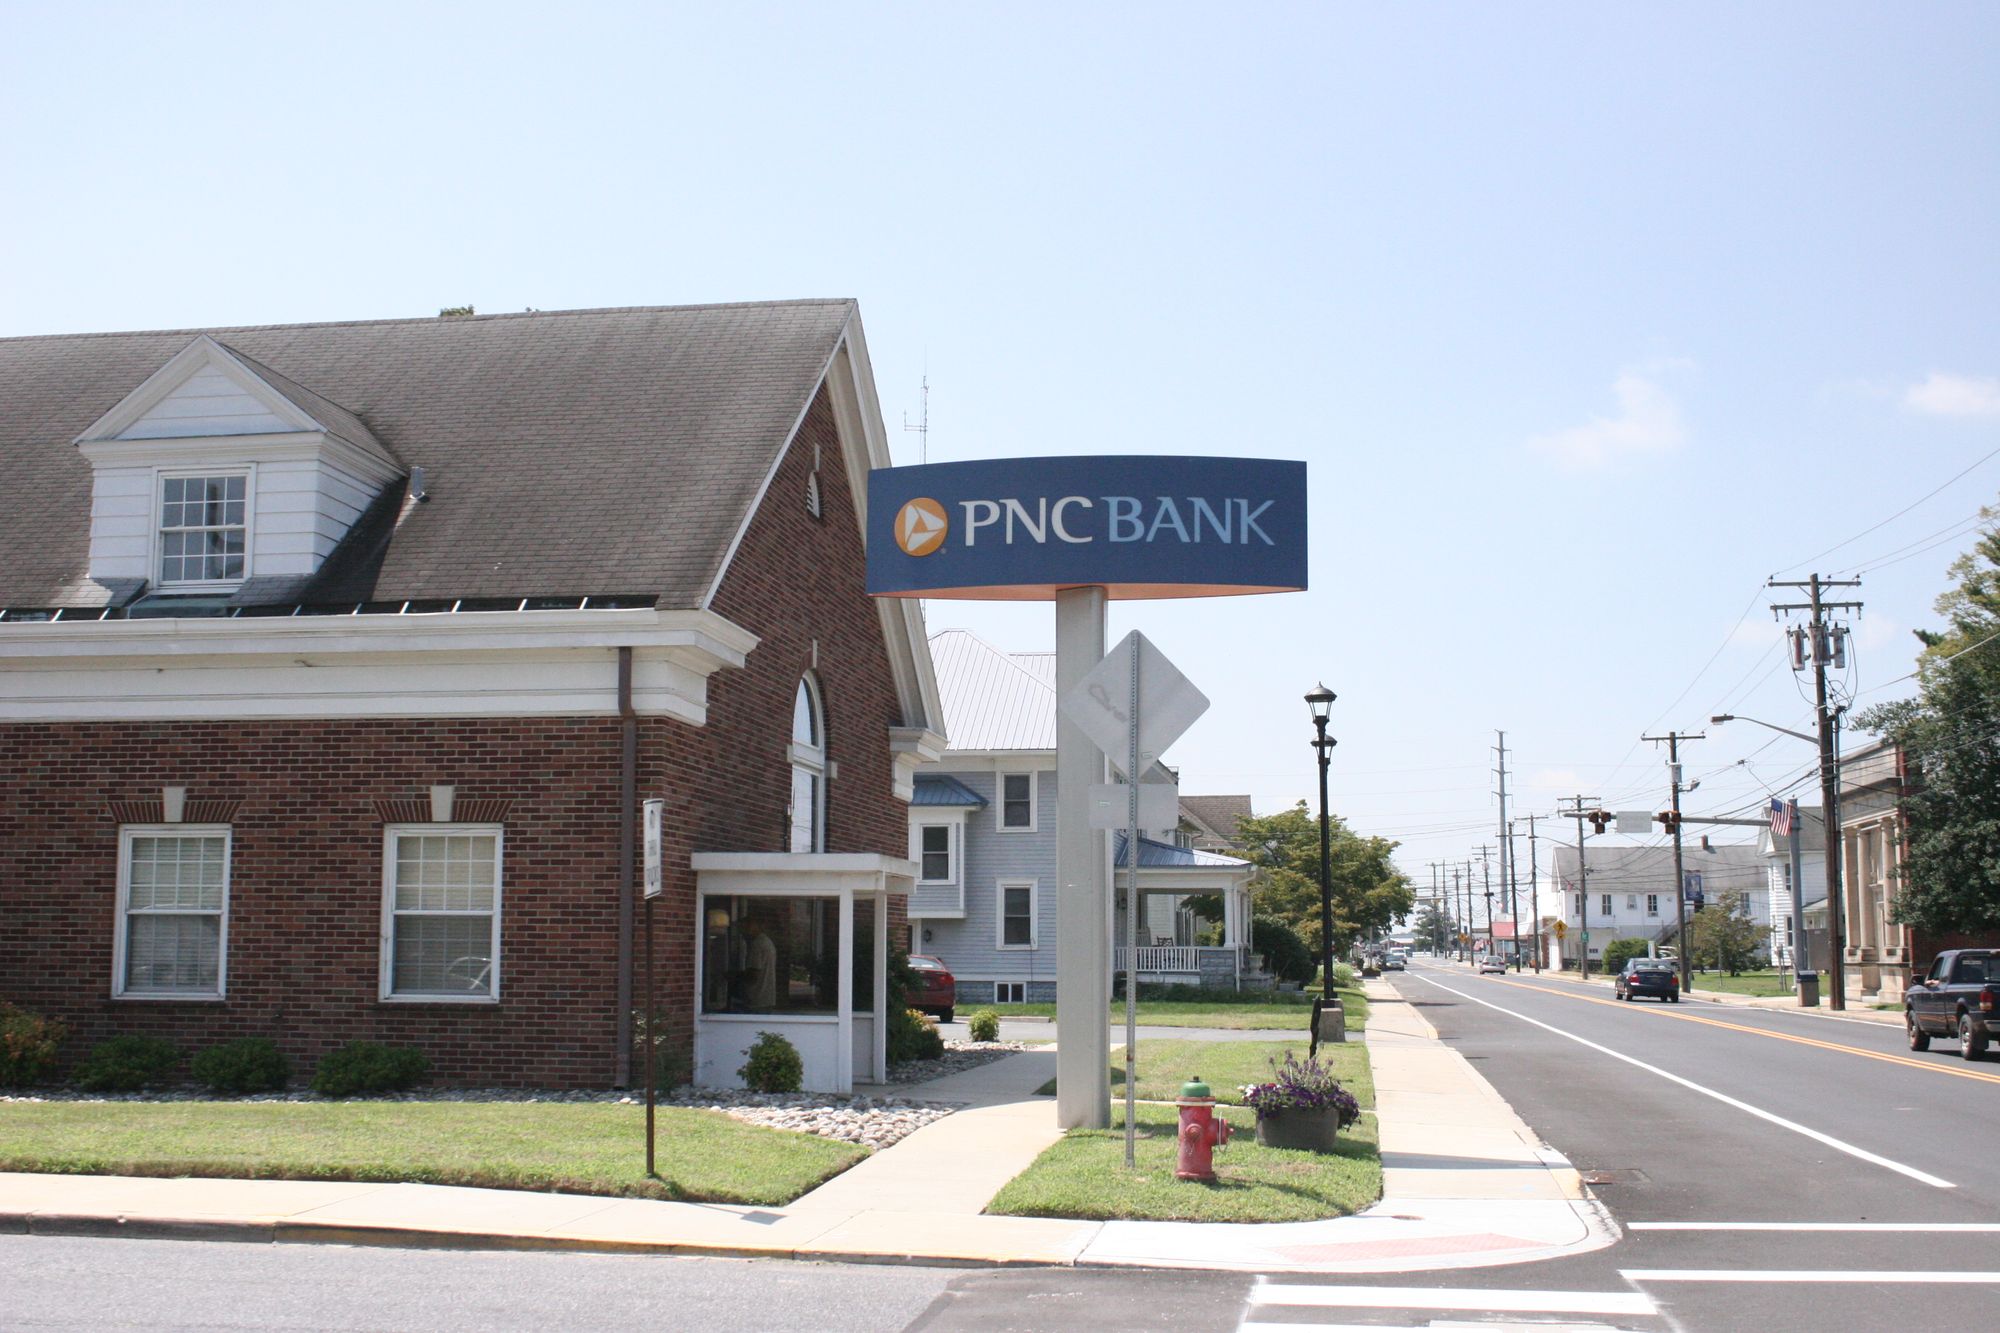 Bridgeville bank is closing, but town says rumors about site aren't true